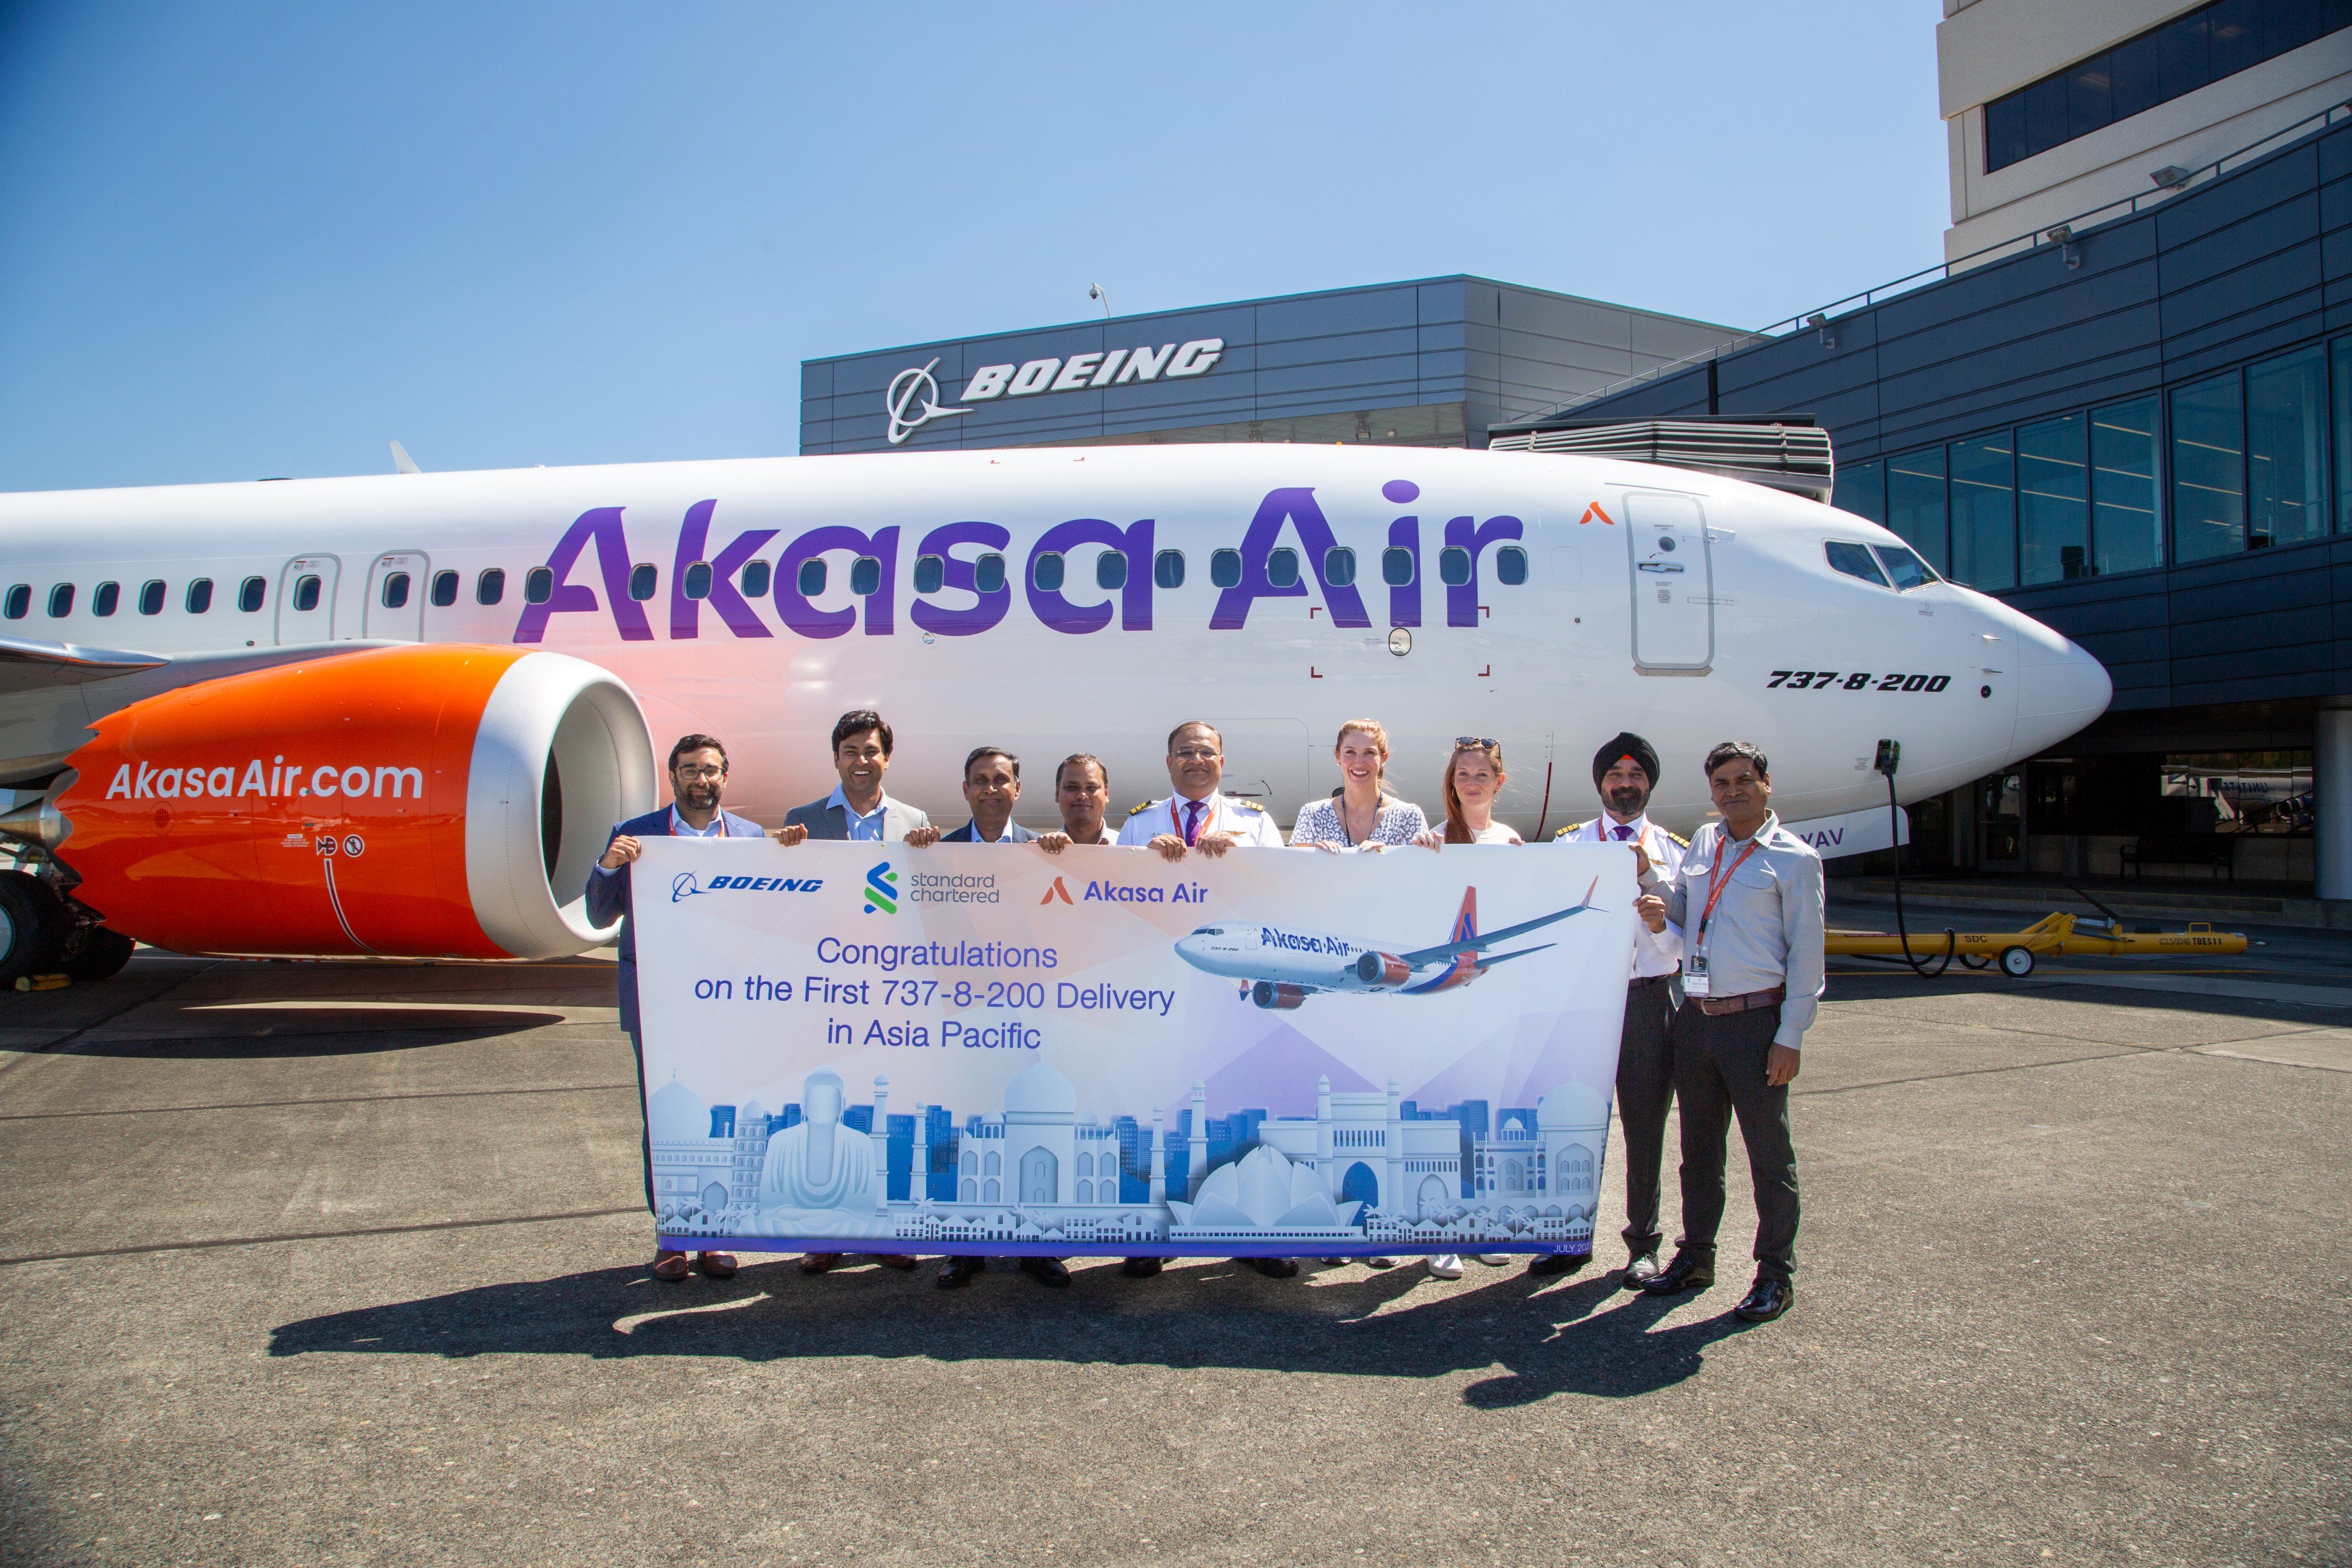 Akasa Air added its 20th aircraft on August 1st